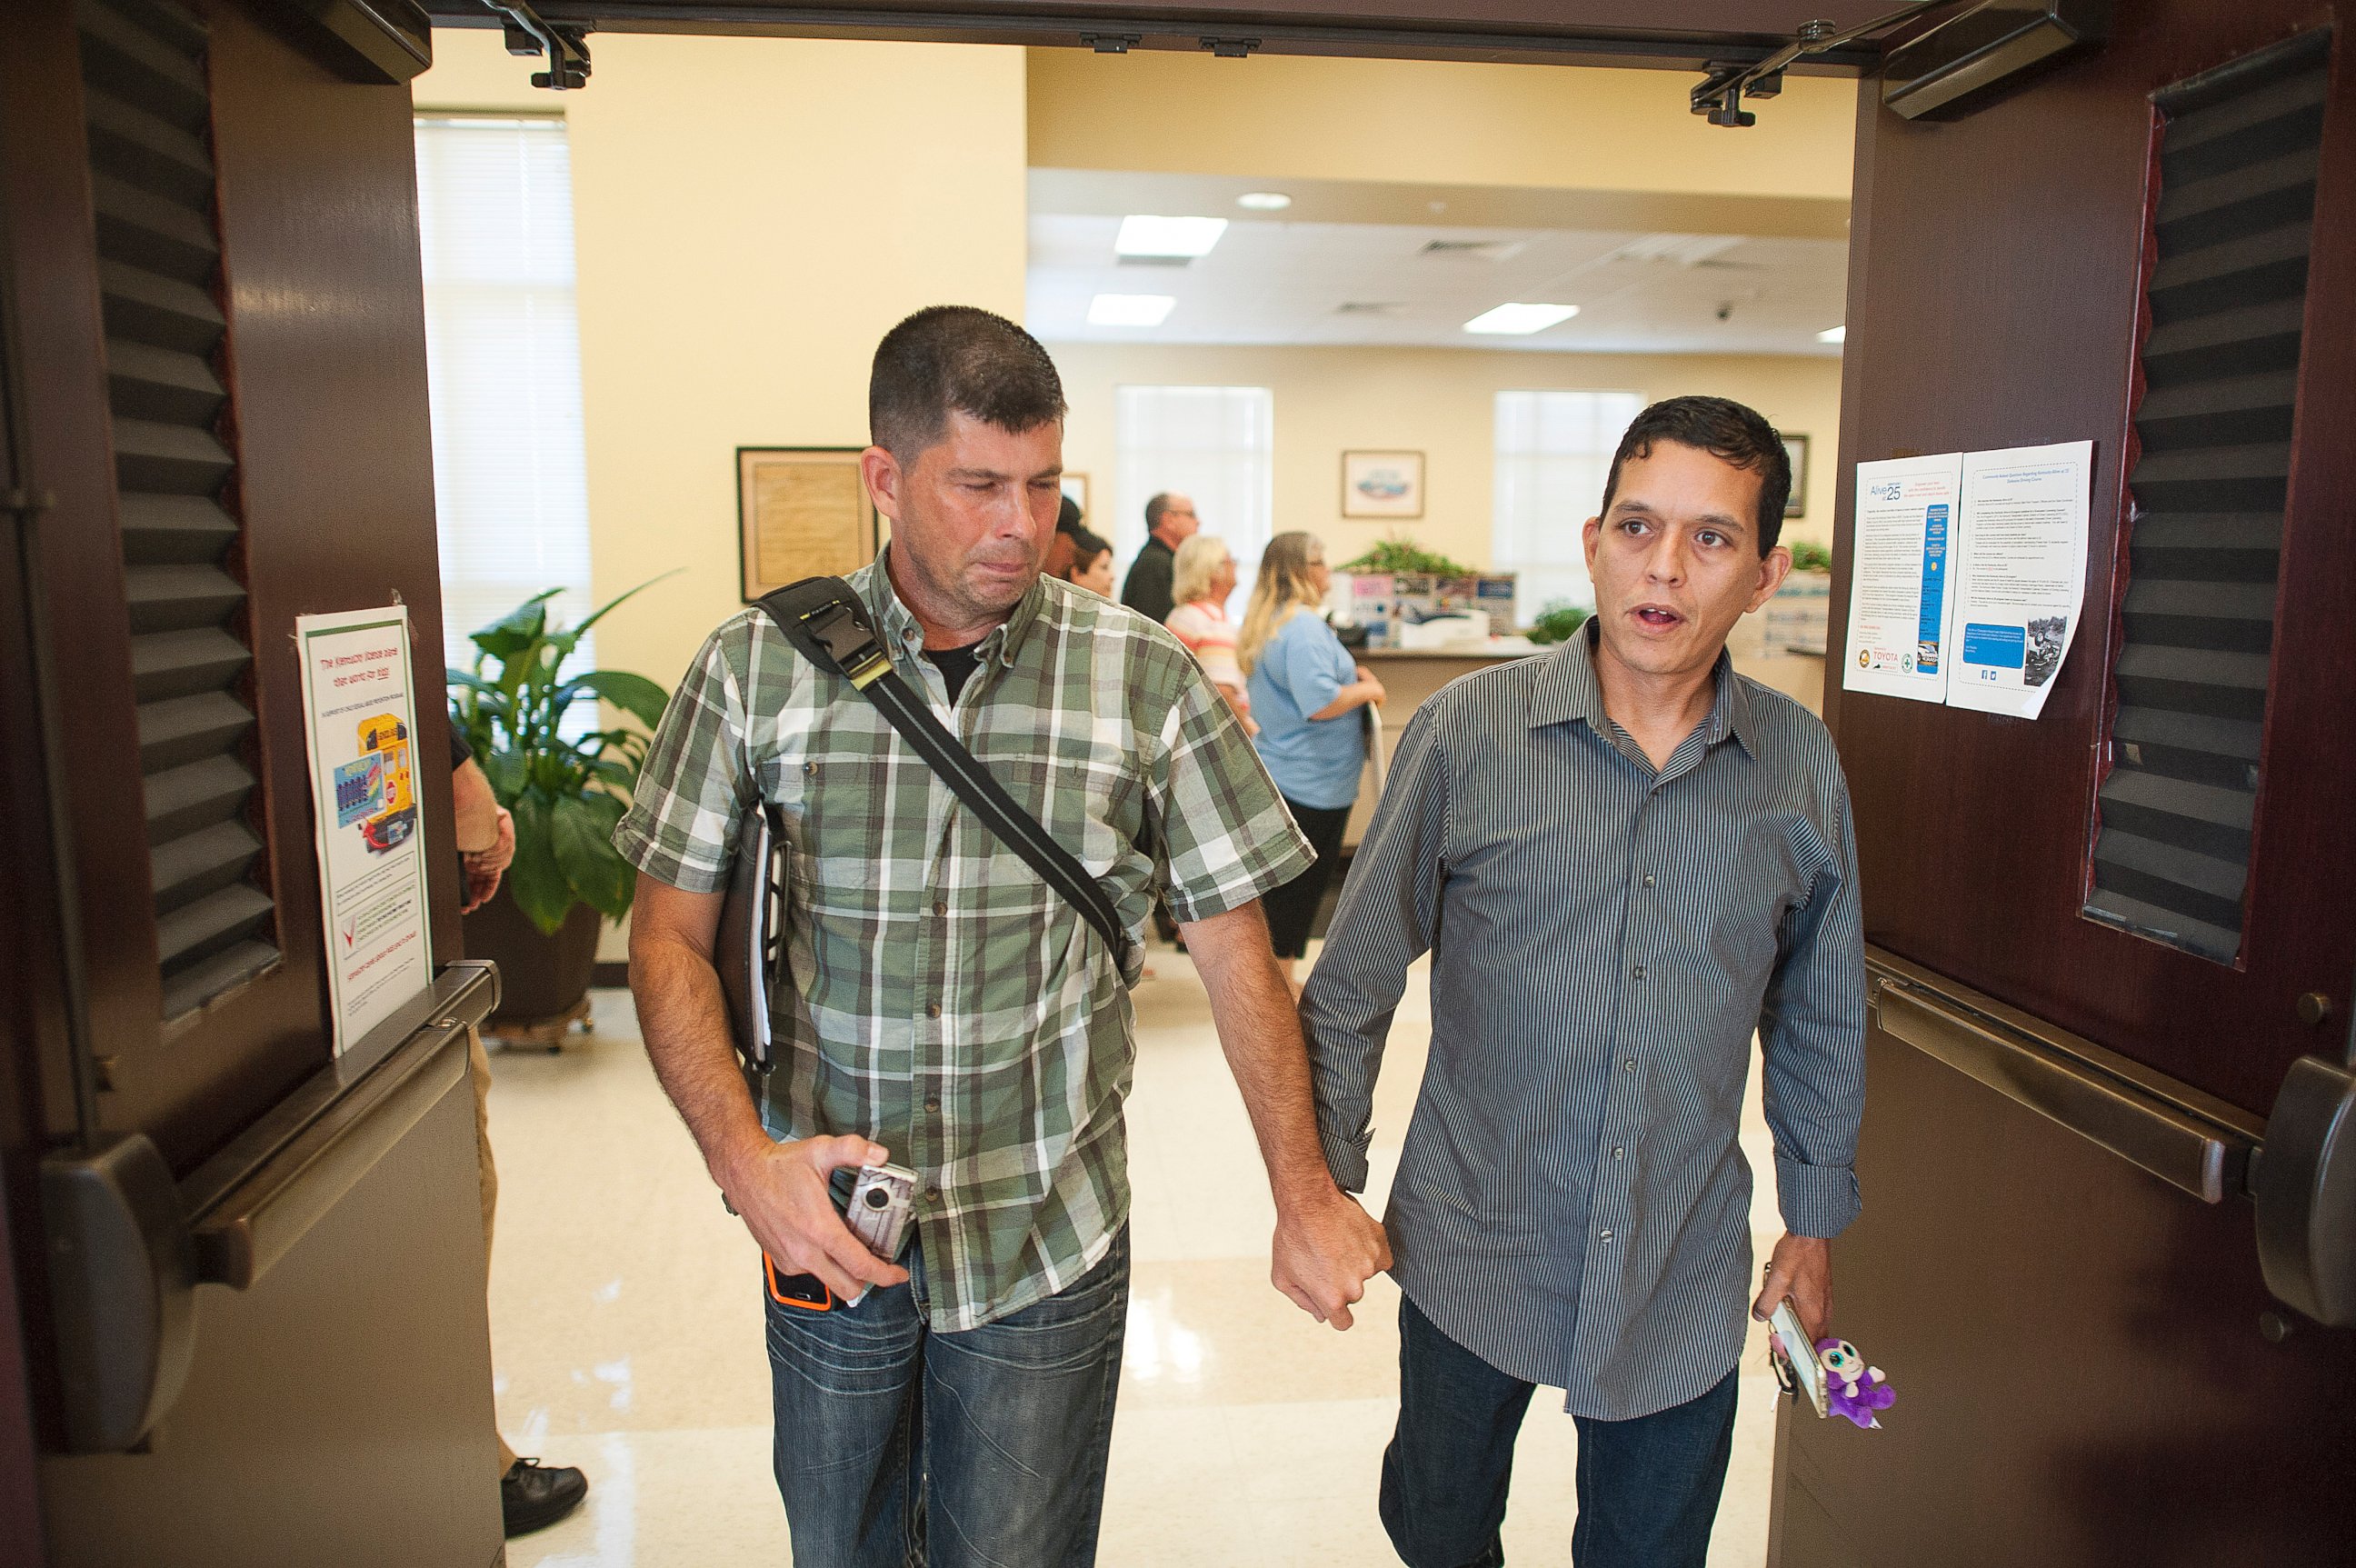 PHOTO: Robbie Blankenship and his partner Jesse Cruz leave the Rowan County Clerks Office after being denied a marriage license on Sept. 2, 2015 in Morehead, Ky.